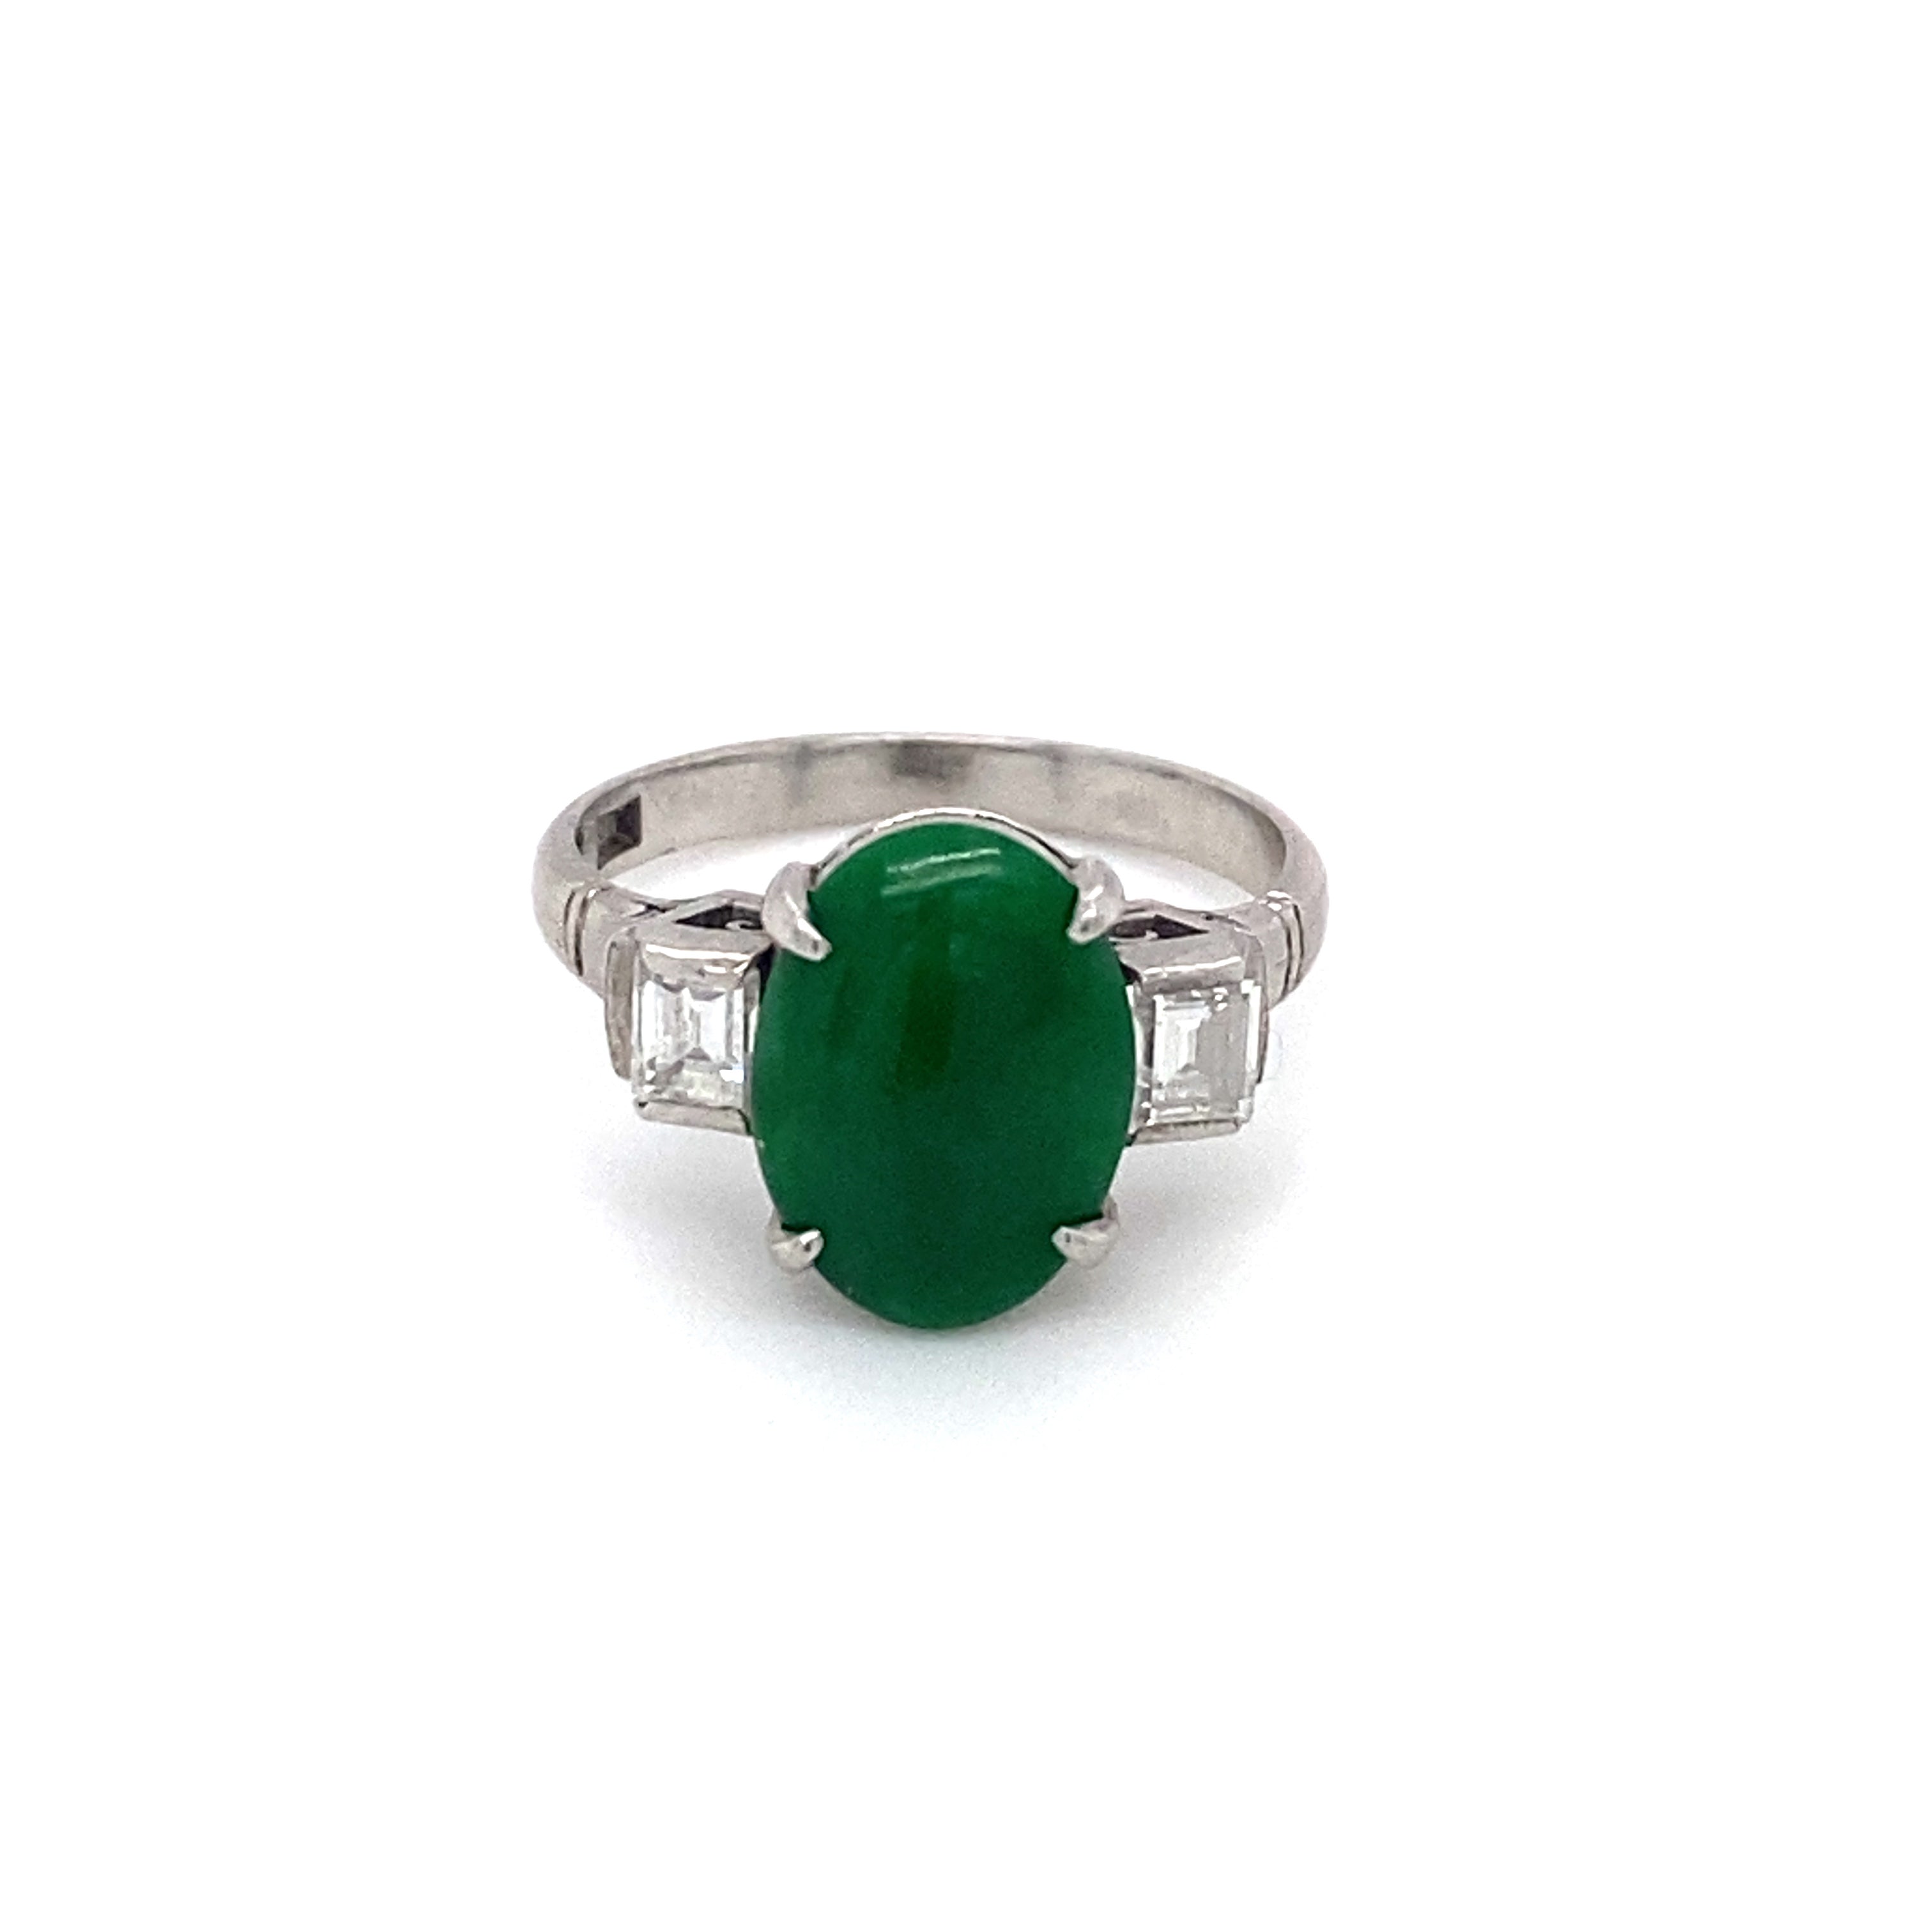 Jasmine Ring with a 2.18 Carat Oval Green Sapphire and Light Green Dia –  Midwinter Co. Alternative Bridal Rings and Modern Fine Jewelry